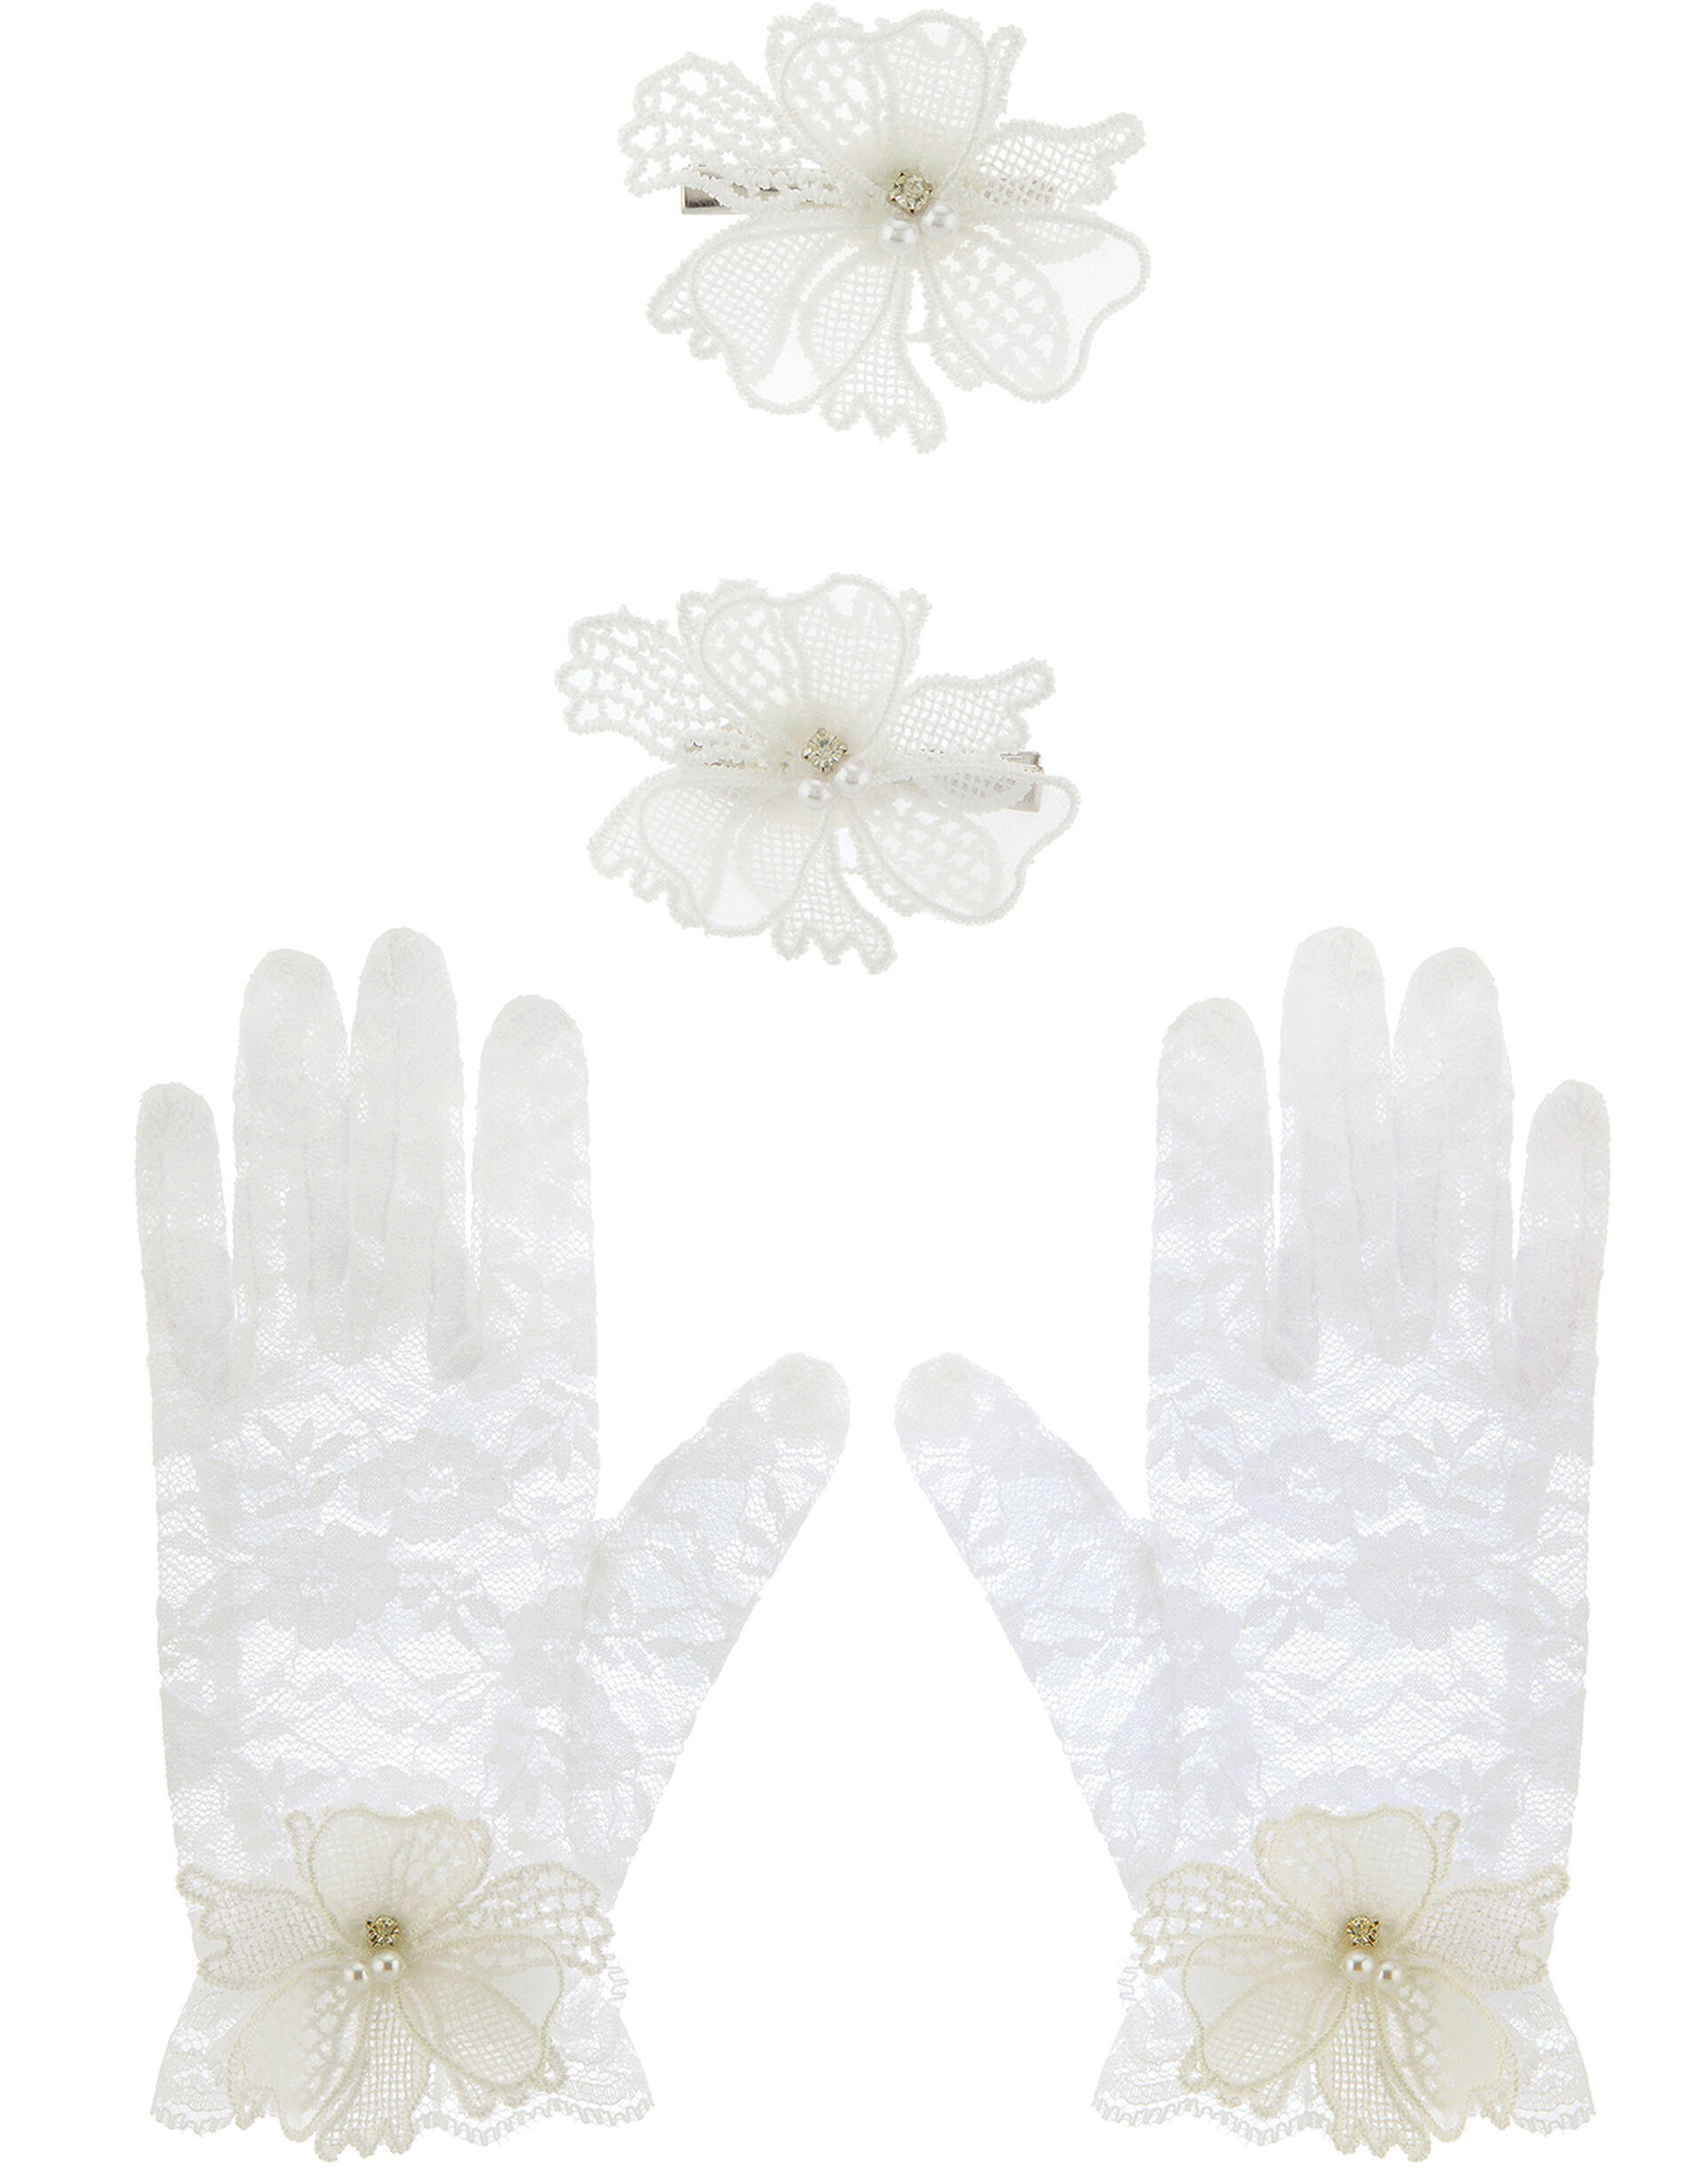 Lace Butterfly Glove and Hair Clip Set, , large